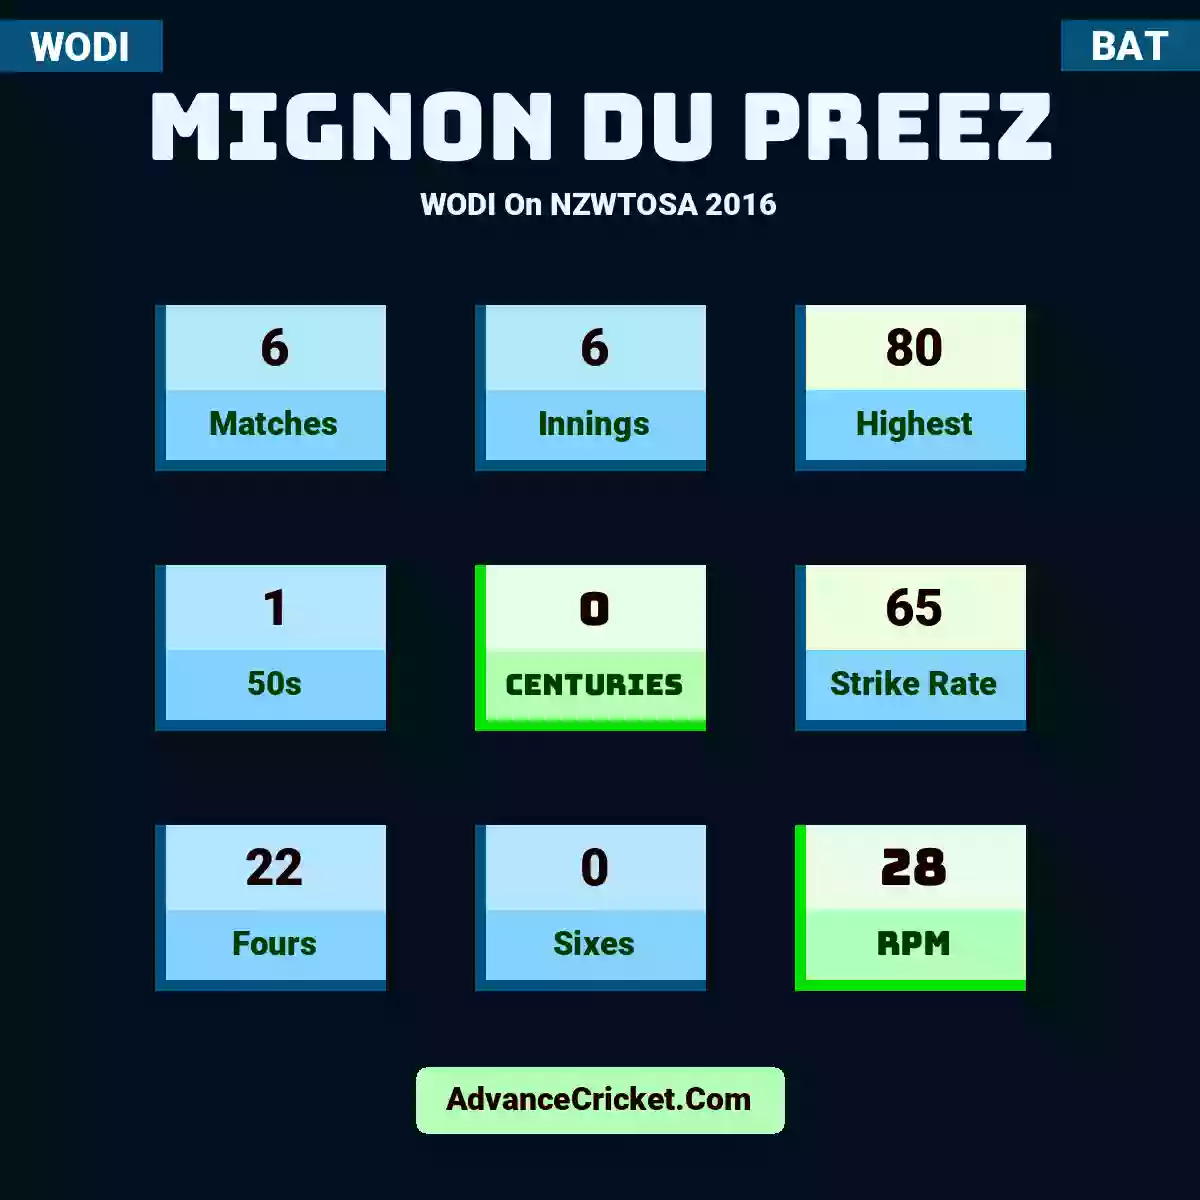 Mignon du Preez WODI  On NZWTOSA 2016, Mignon du Preez played 6 matches, scored 80 runs as highest, 1 half-centuries, and 0 centuries, with a strike rate of 65. M.Preez hit 22 fours and 0 sixes, with an RPM of 28.